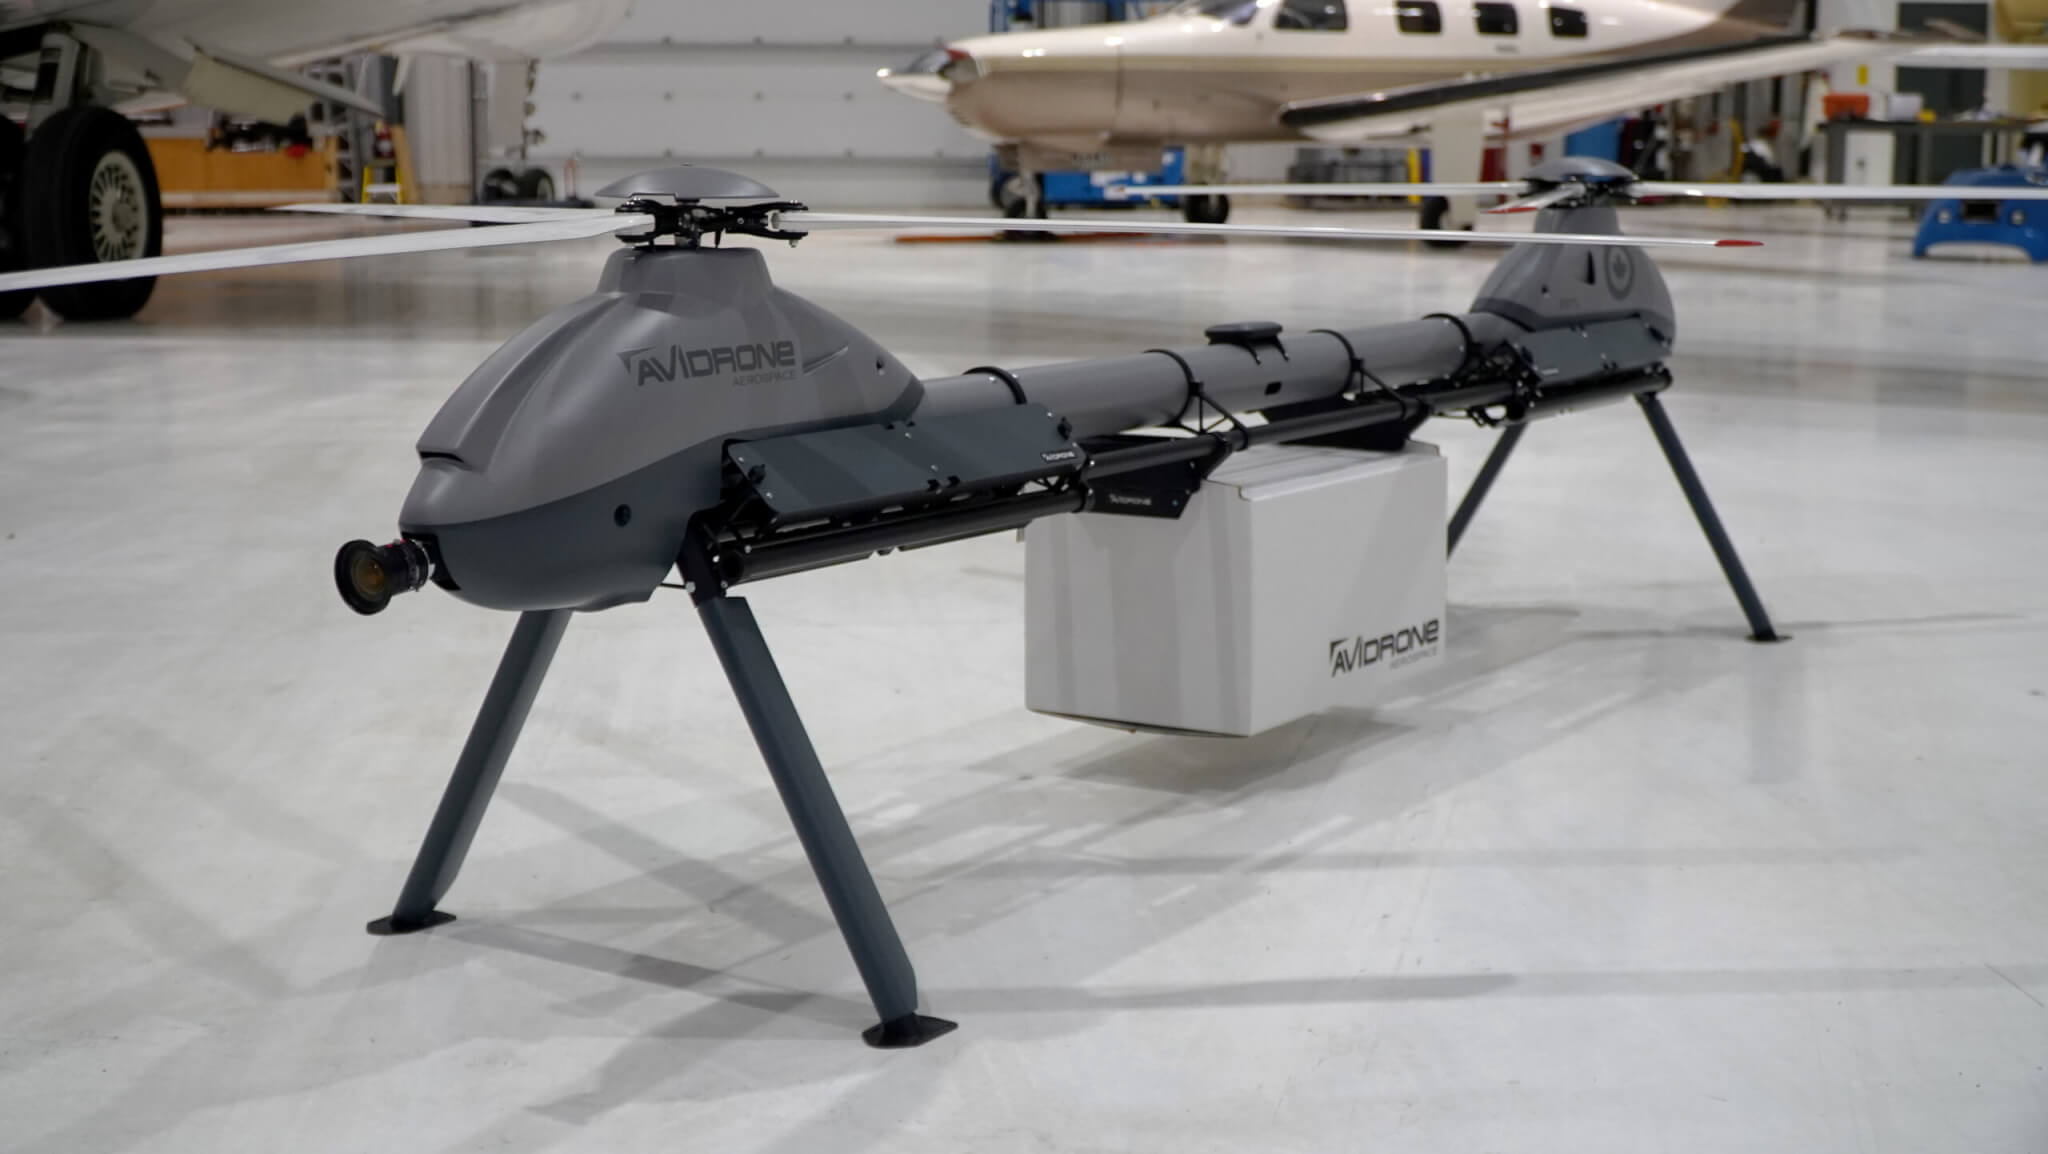 Avidrone Aerospace exhibits flagship 210TL Tandem drone integrated with Iris Automation’s Casia onboard detect and avoid technology at IDEX 2021